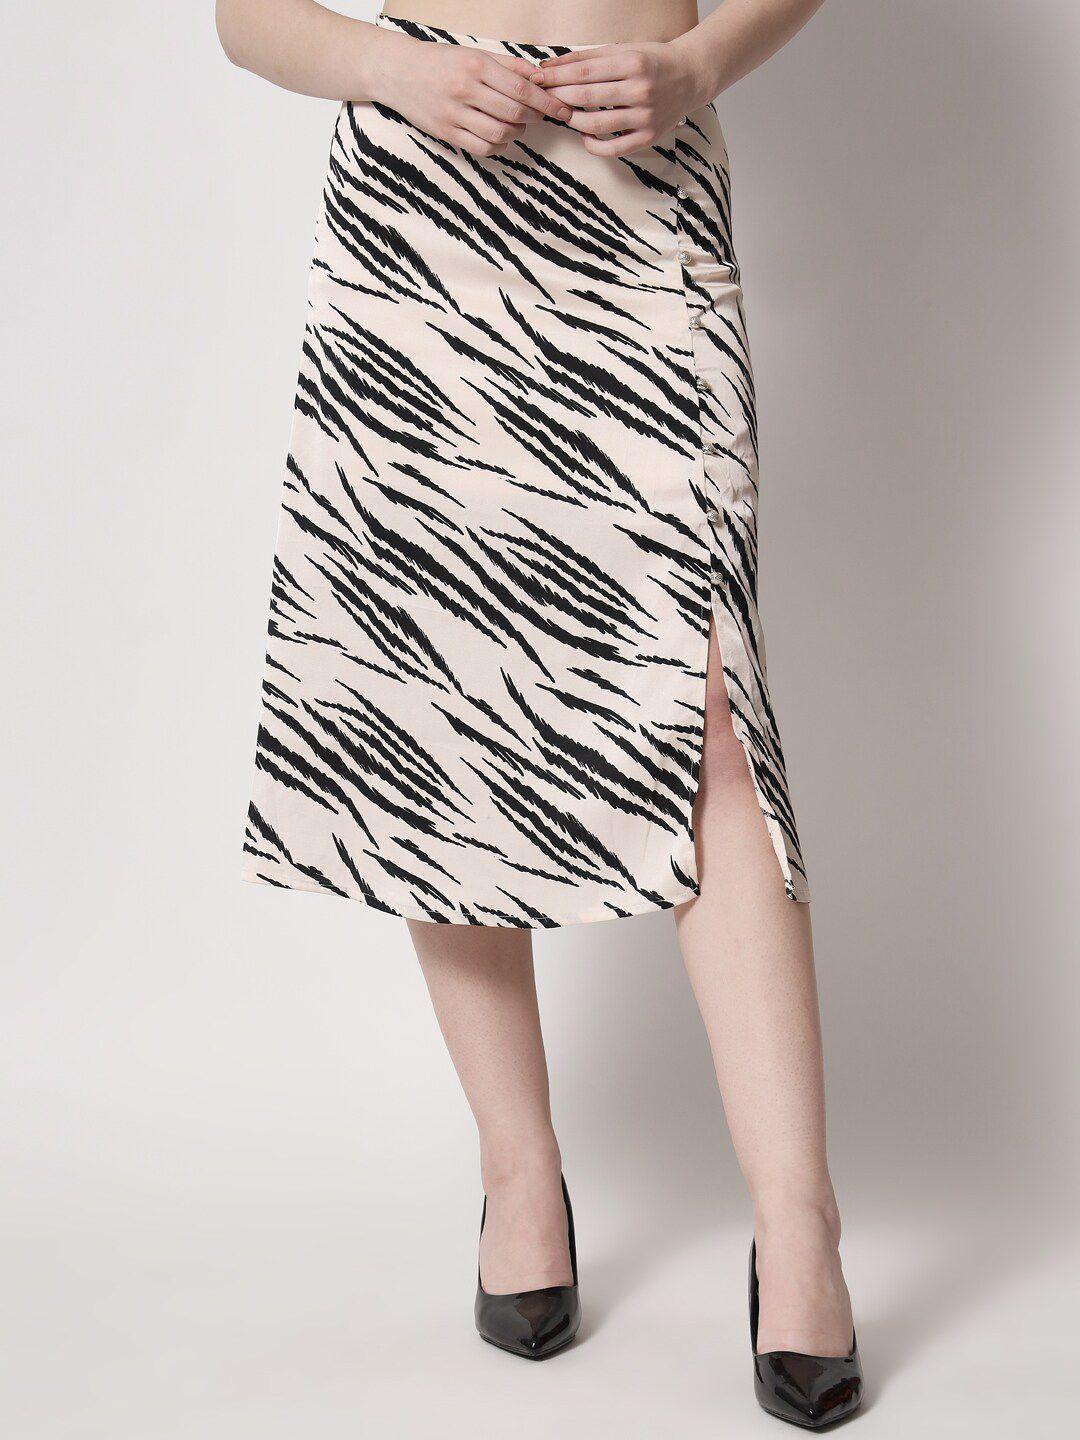 here&now women zebra printed a-line skirt with side slit detail